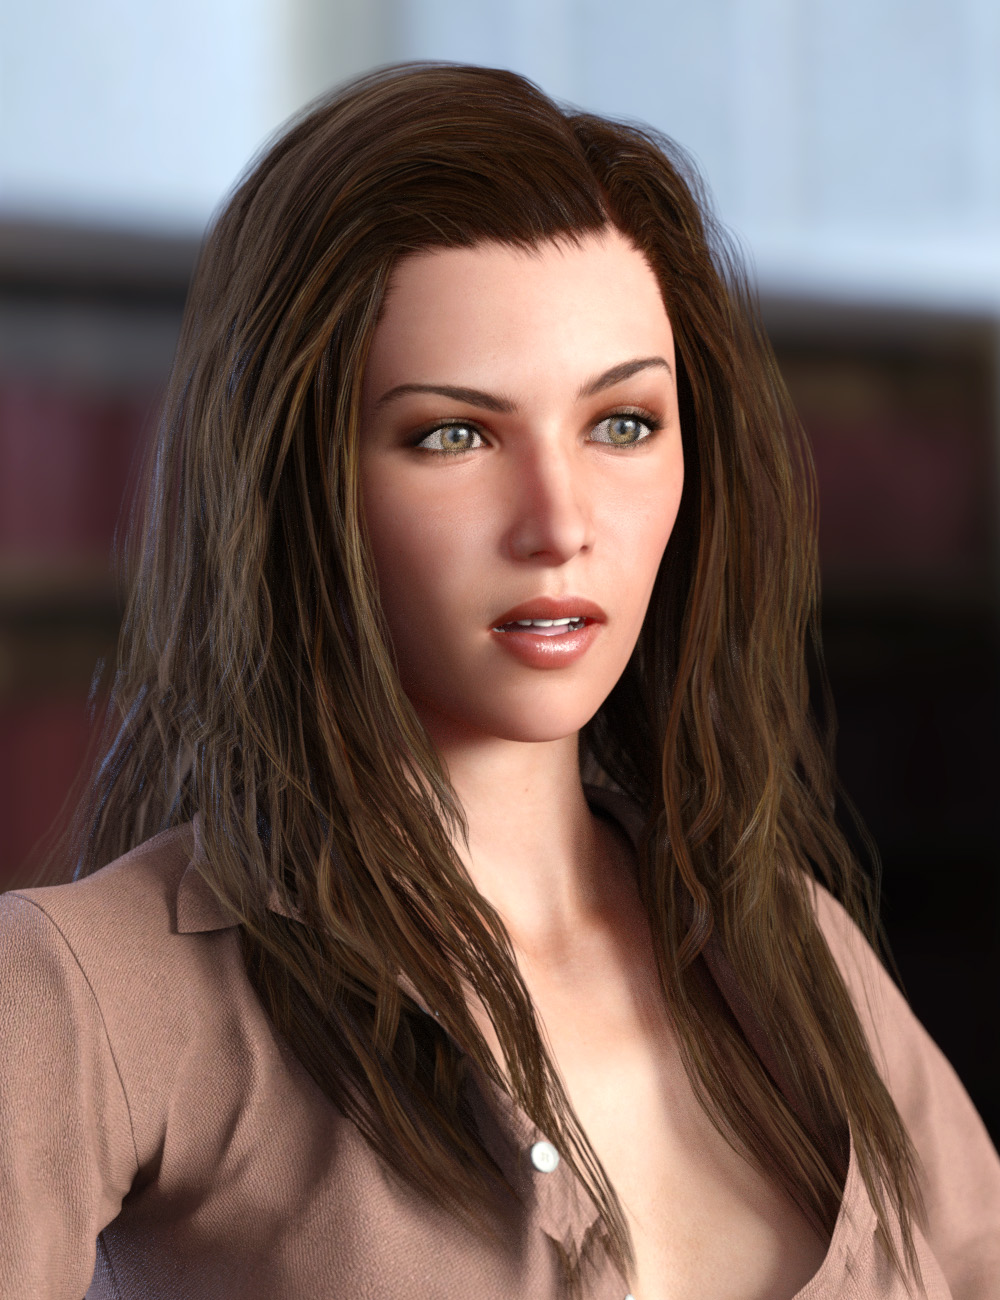 Hair Lustre Shaders for Iray by: PhilW, 3D Models by Daz 3D